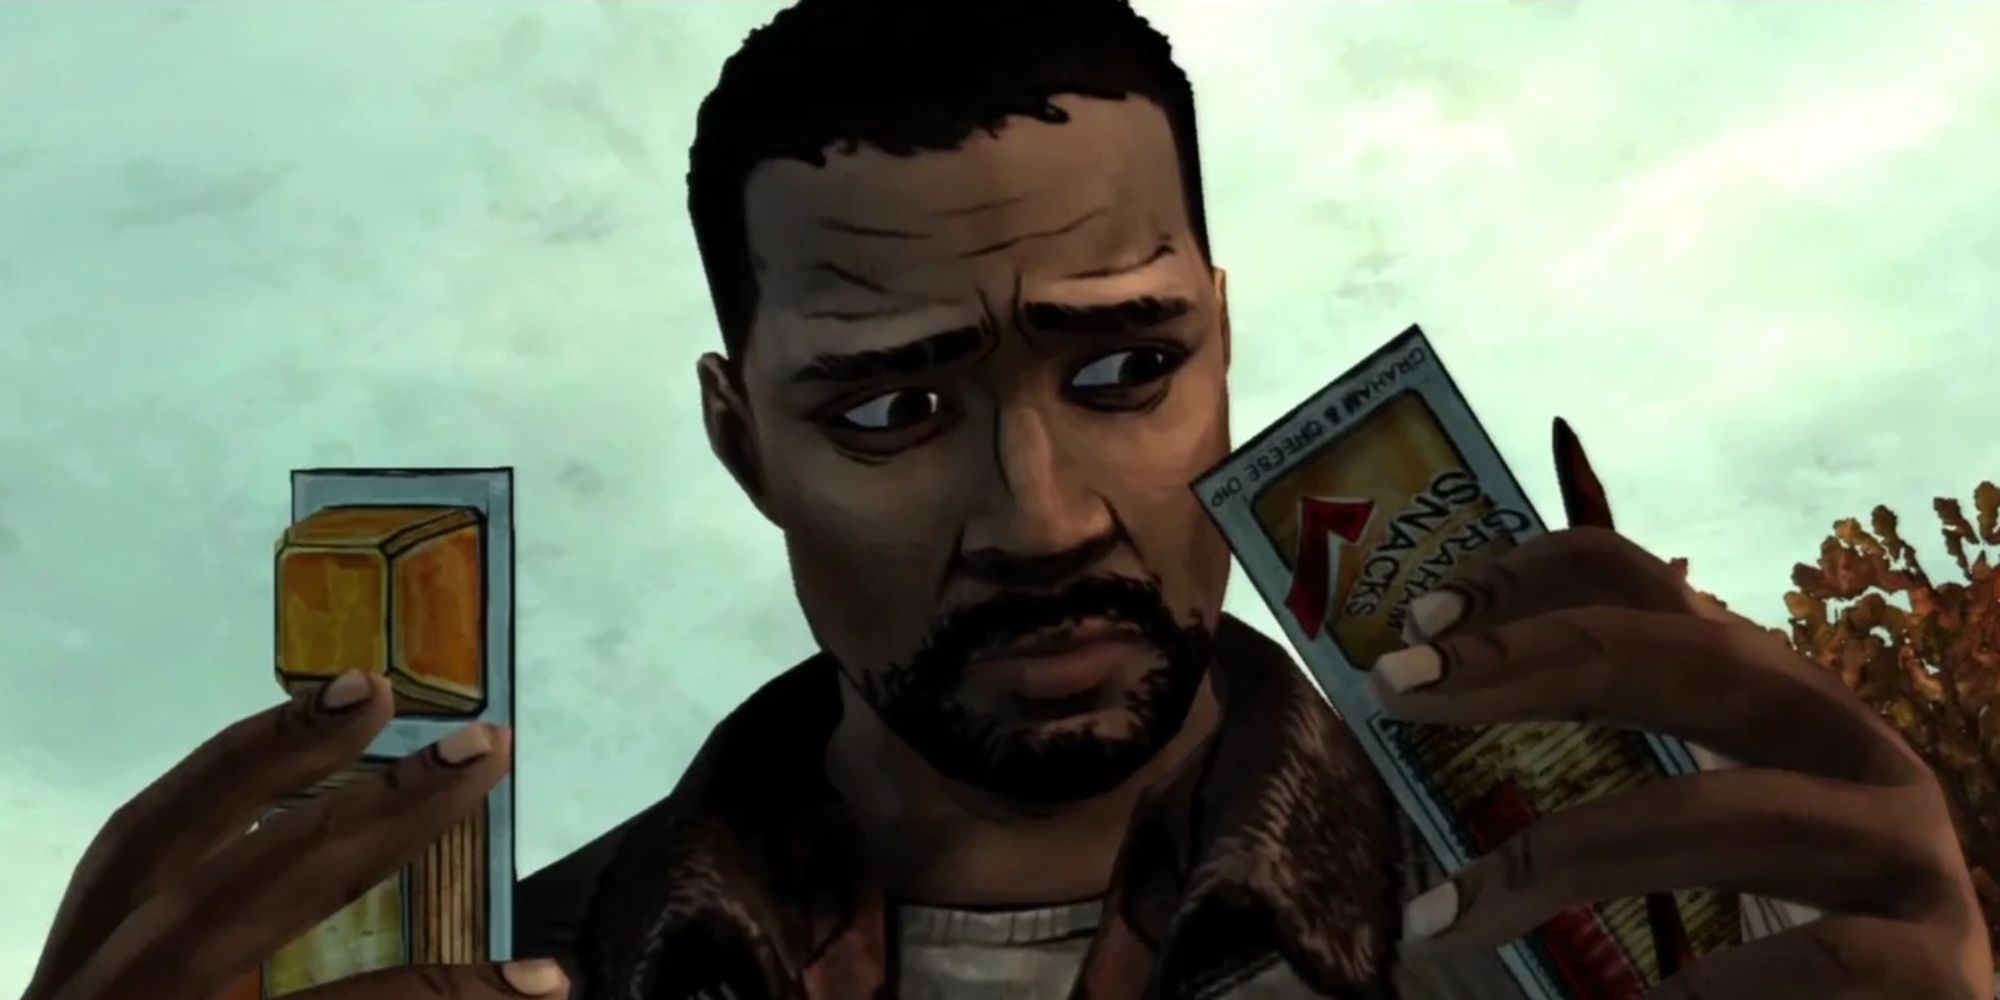 The Walking Dead Screenshot Of Lee With Food Rations